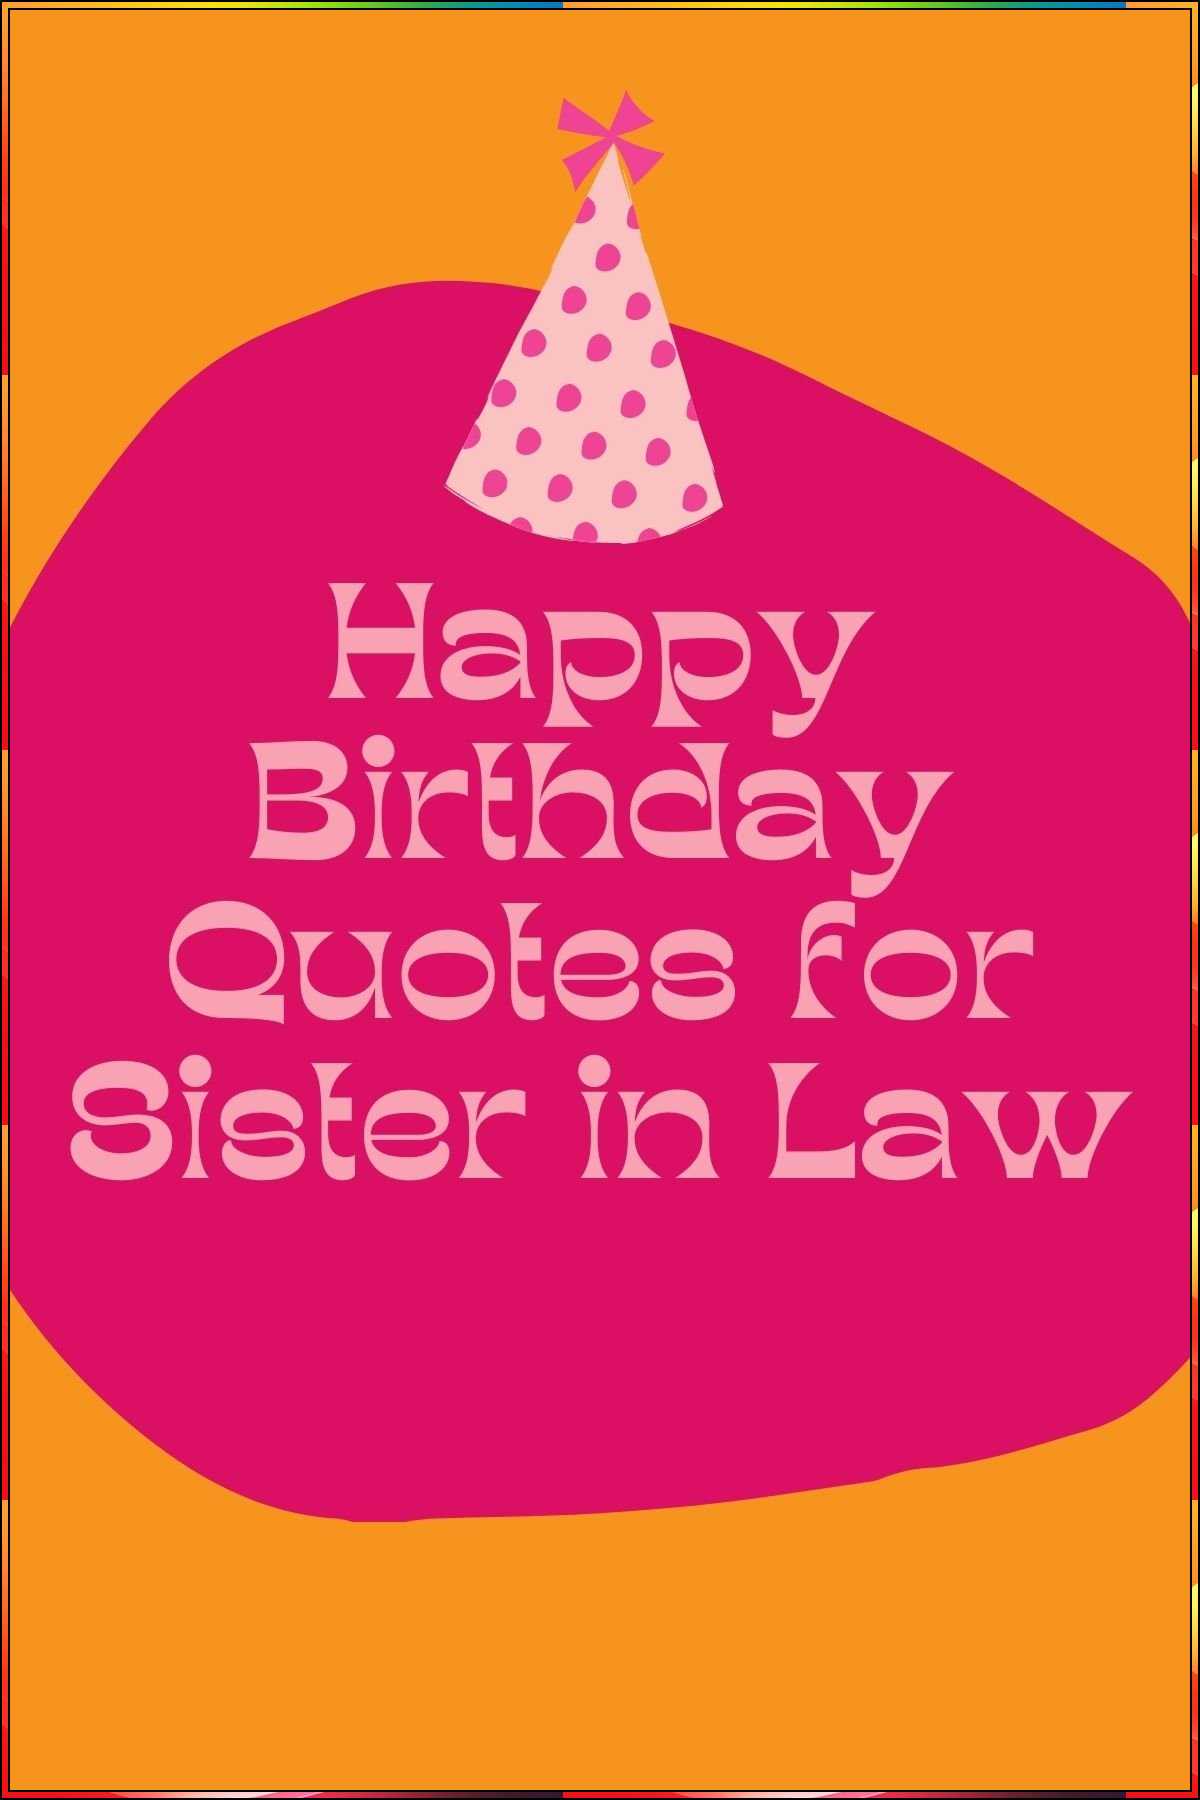 birthday wishes for sister in law images
